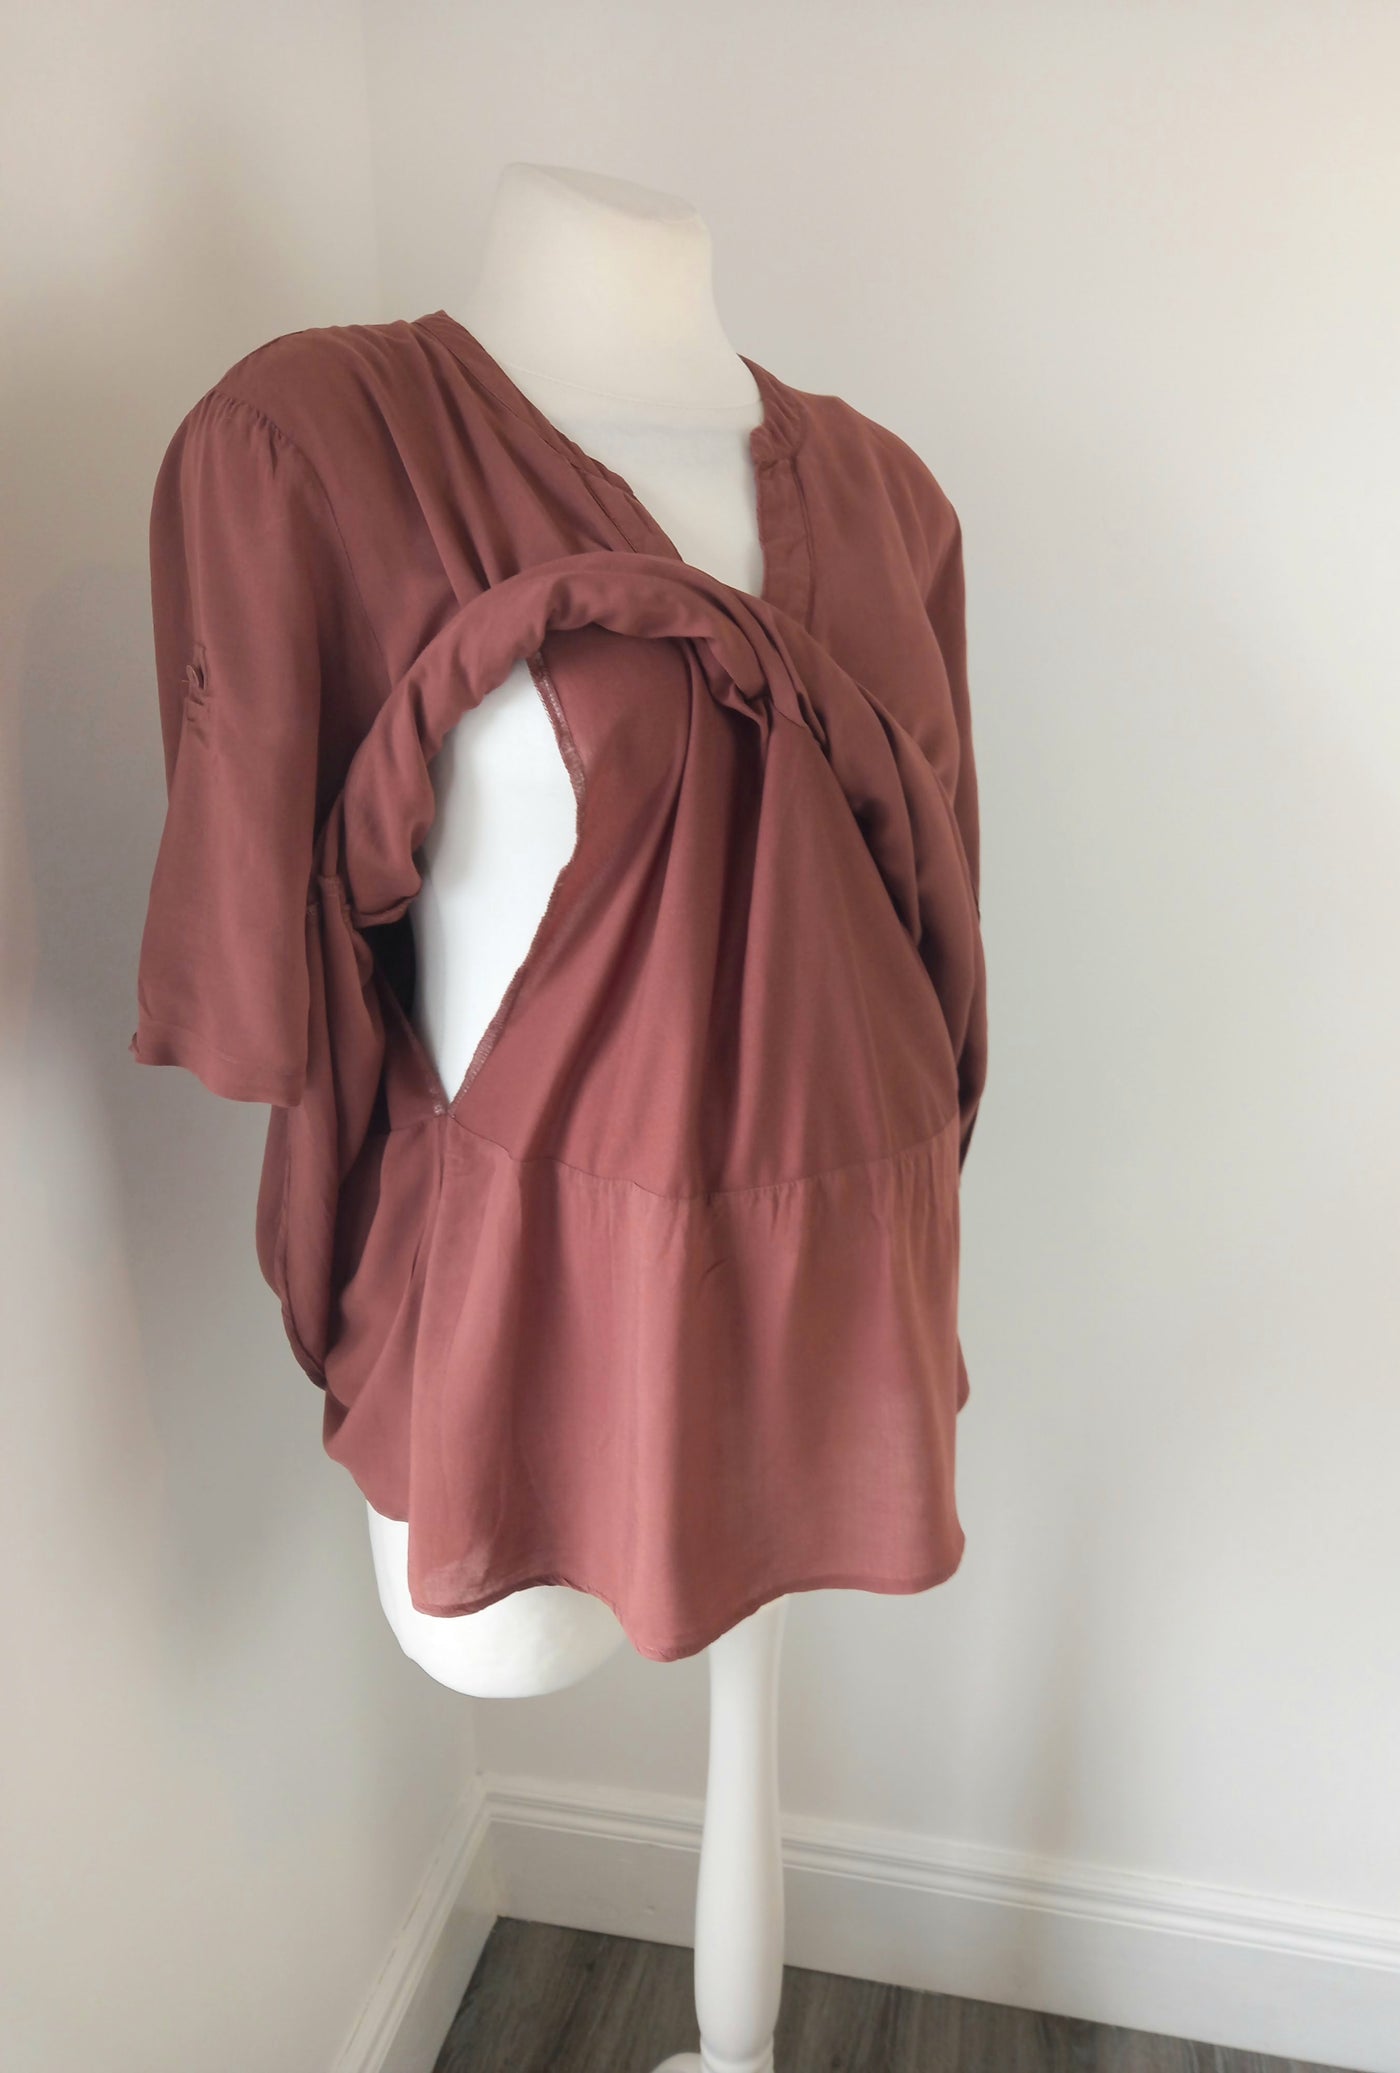 H&M Mama brown v-neck layered nursing top - Size L (Approx UK 12/14)